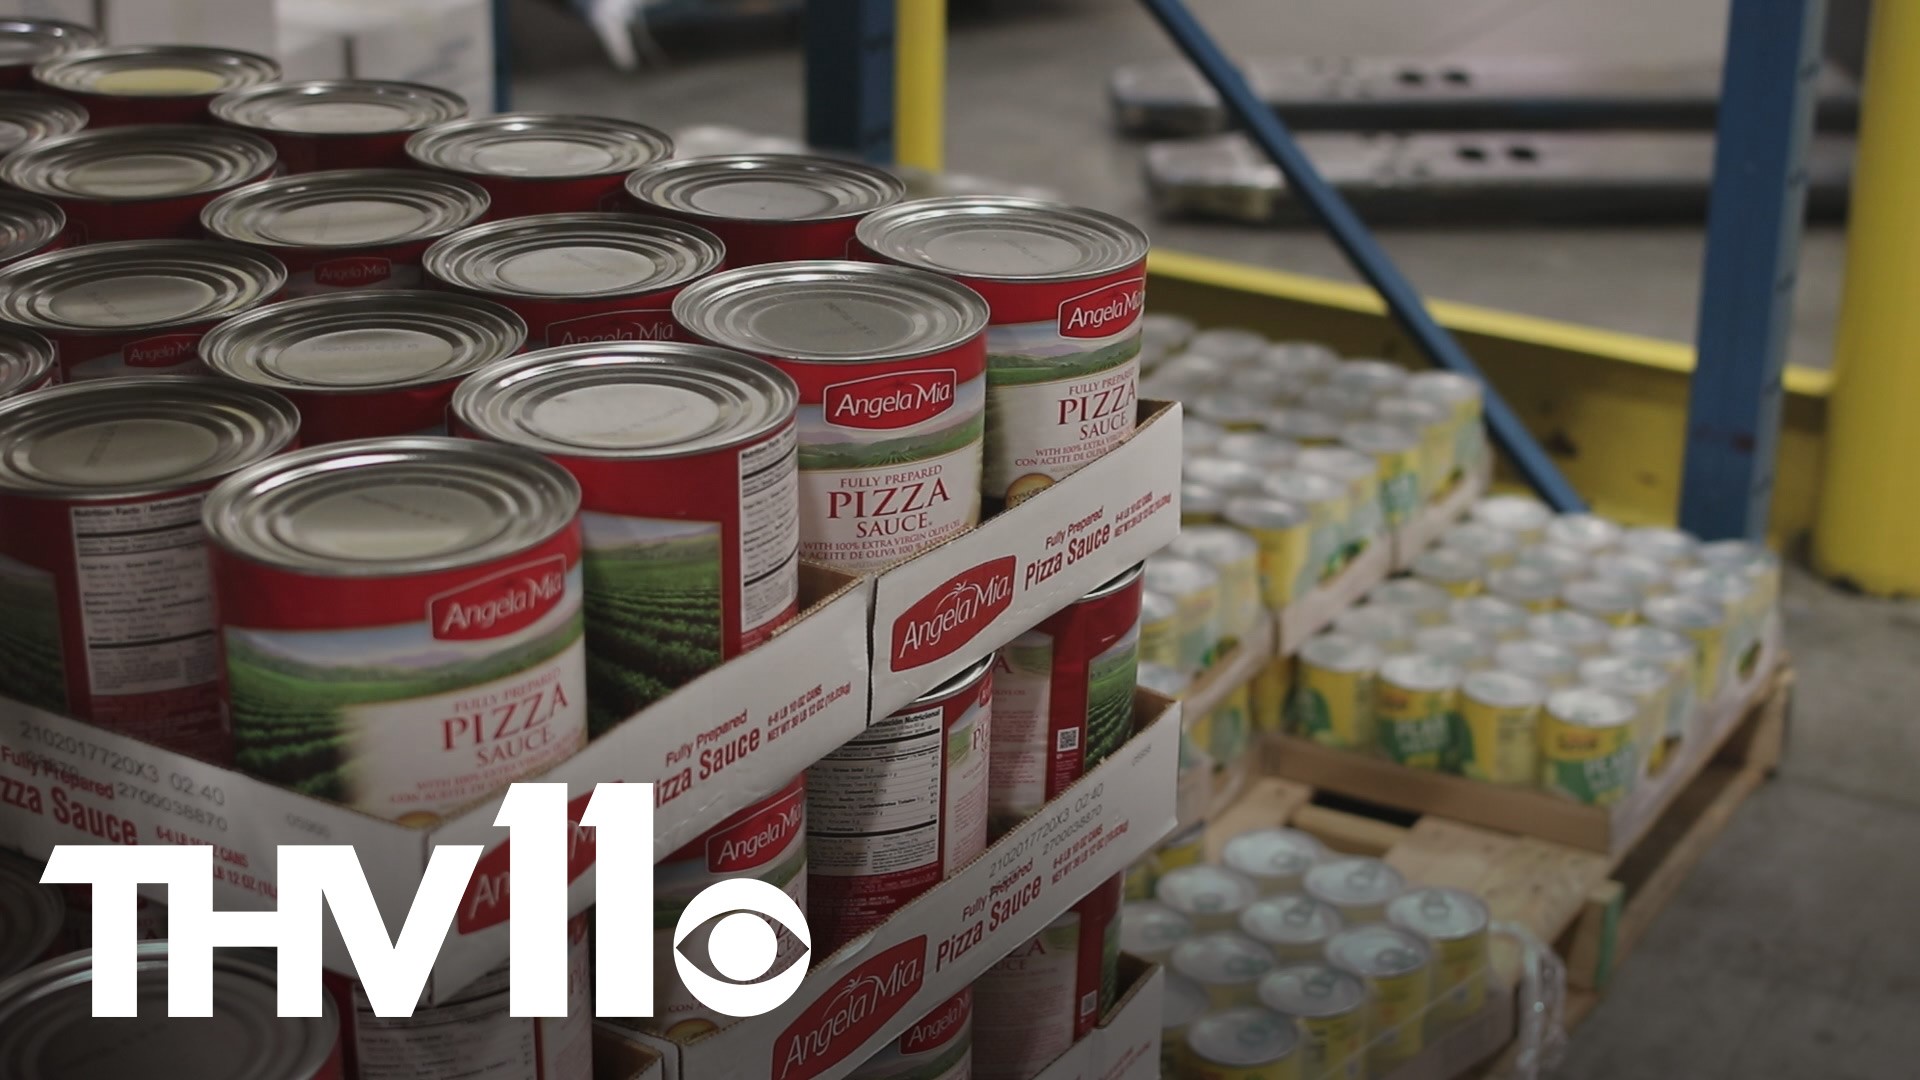 Since March, the Arkansas Foodbank has distributed 28 million pounds of food. That is nearly double compared to 2019, but it's hard to keep up with the demand.